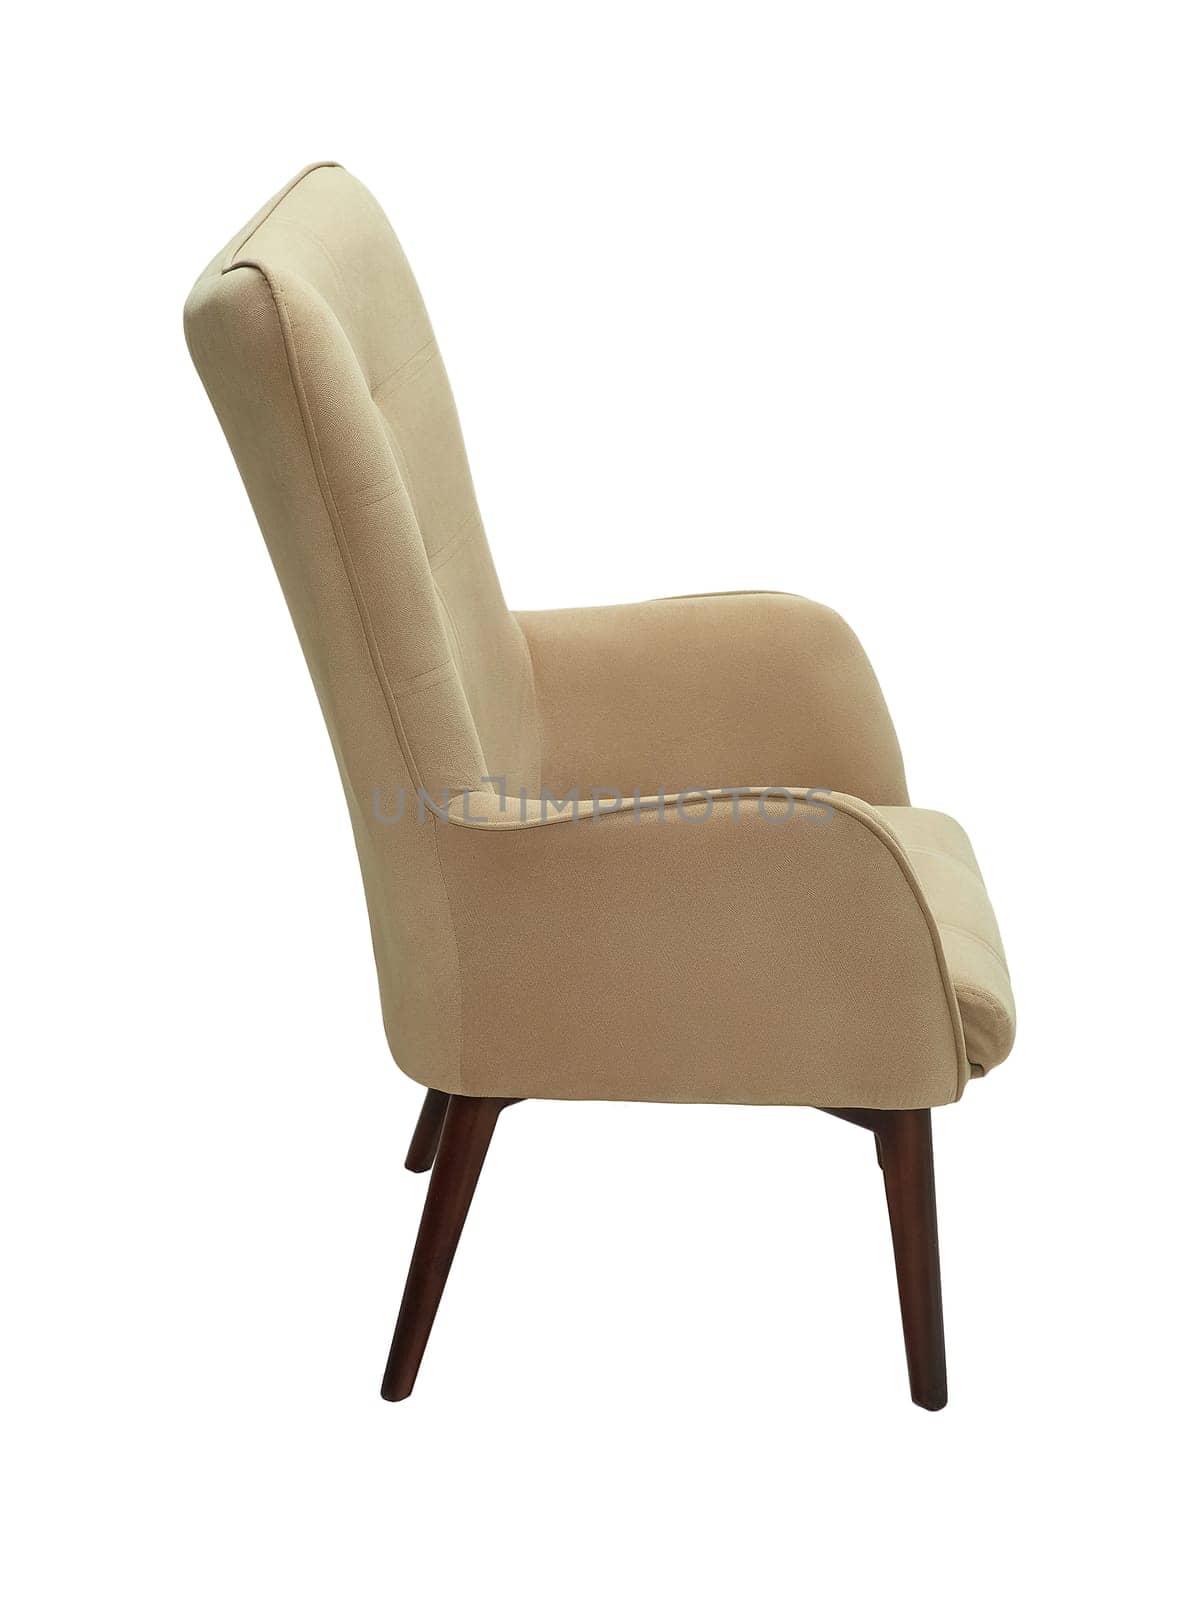 modern beige fabric armchair with wooden legs isolated on white background, side view by artemzatsepilin